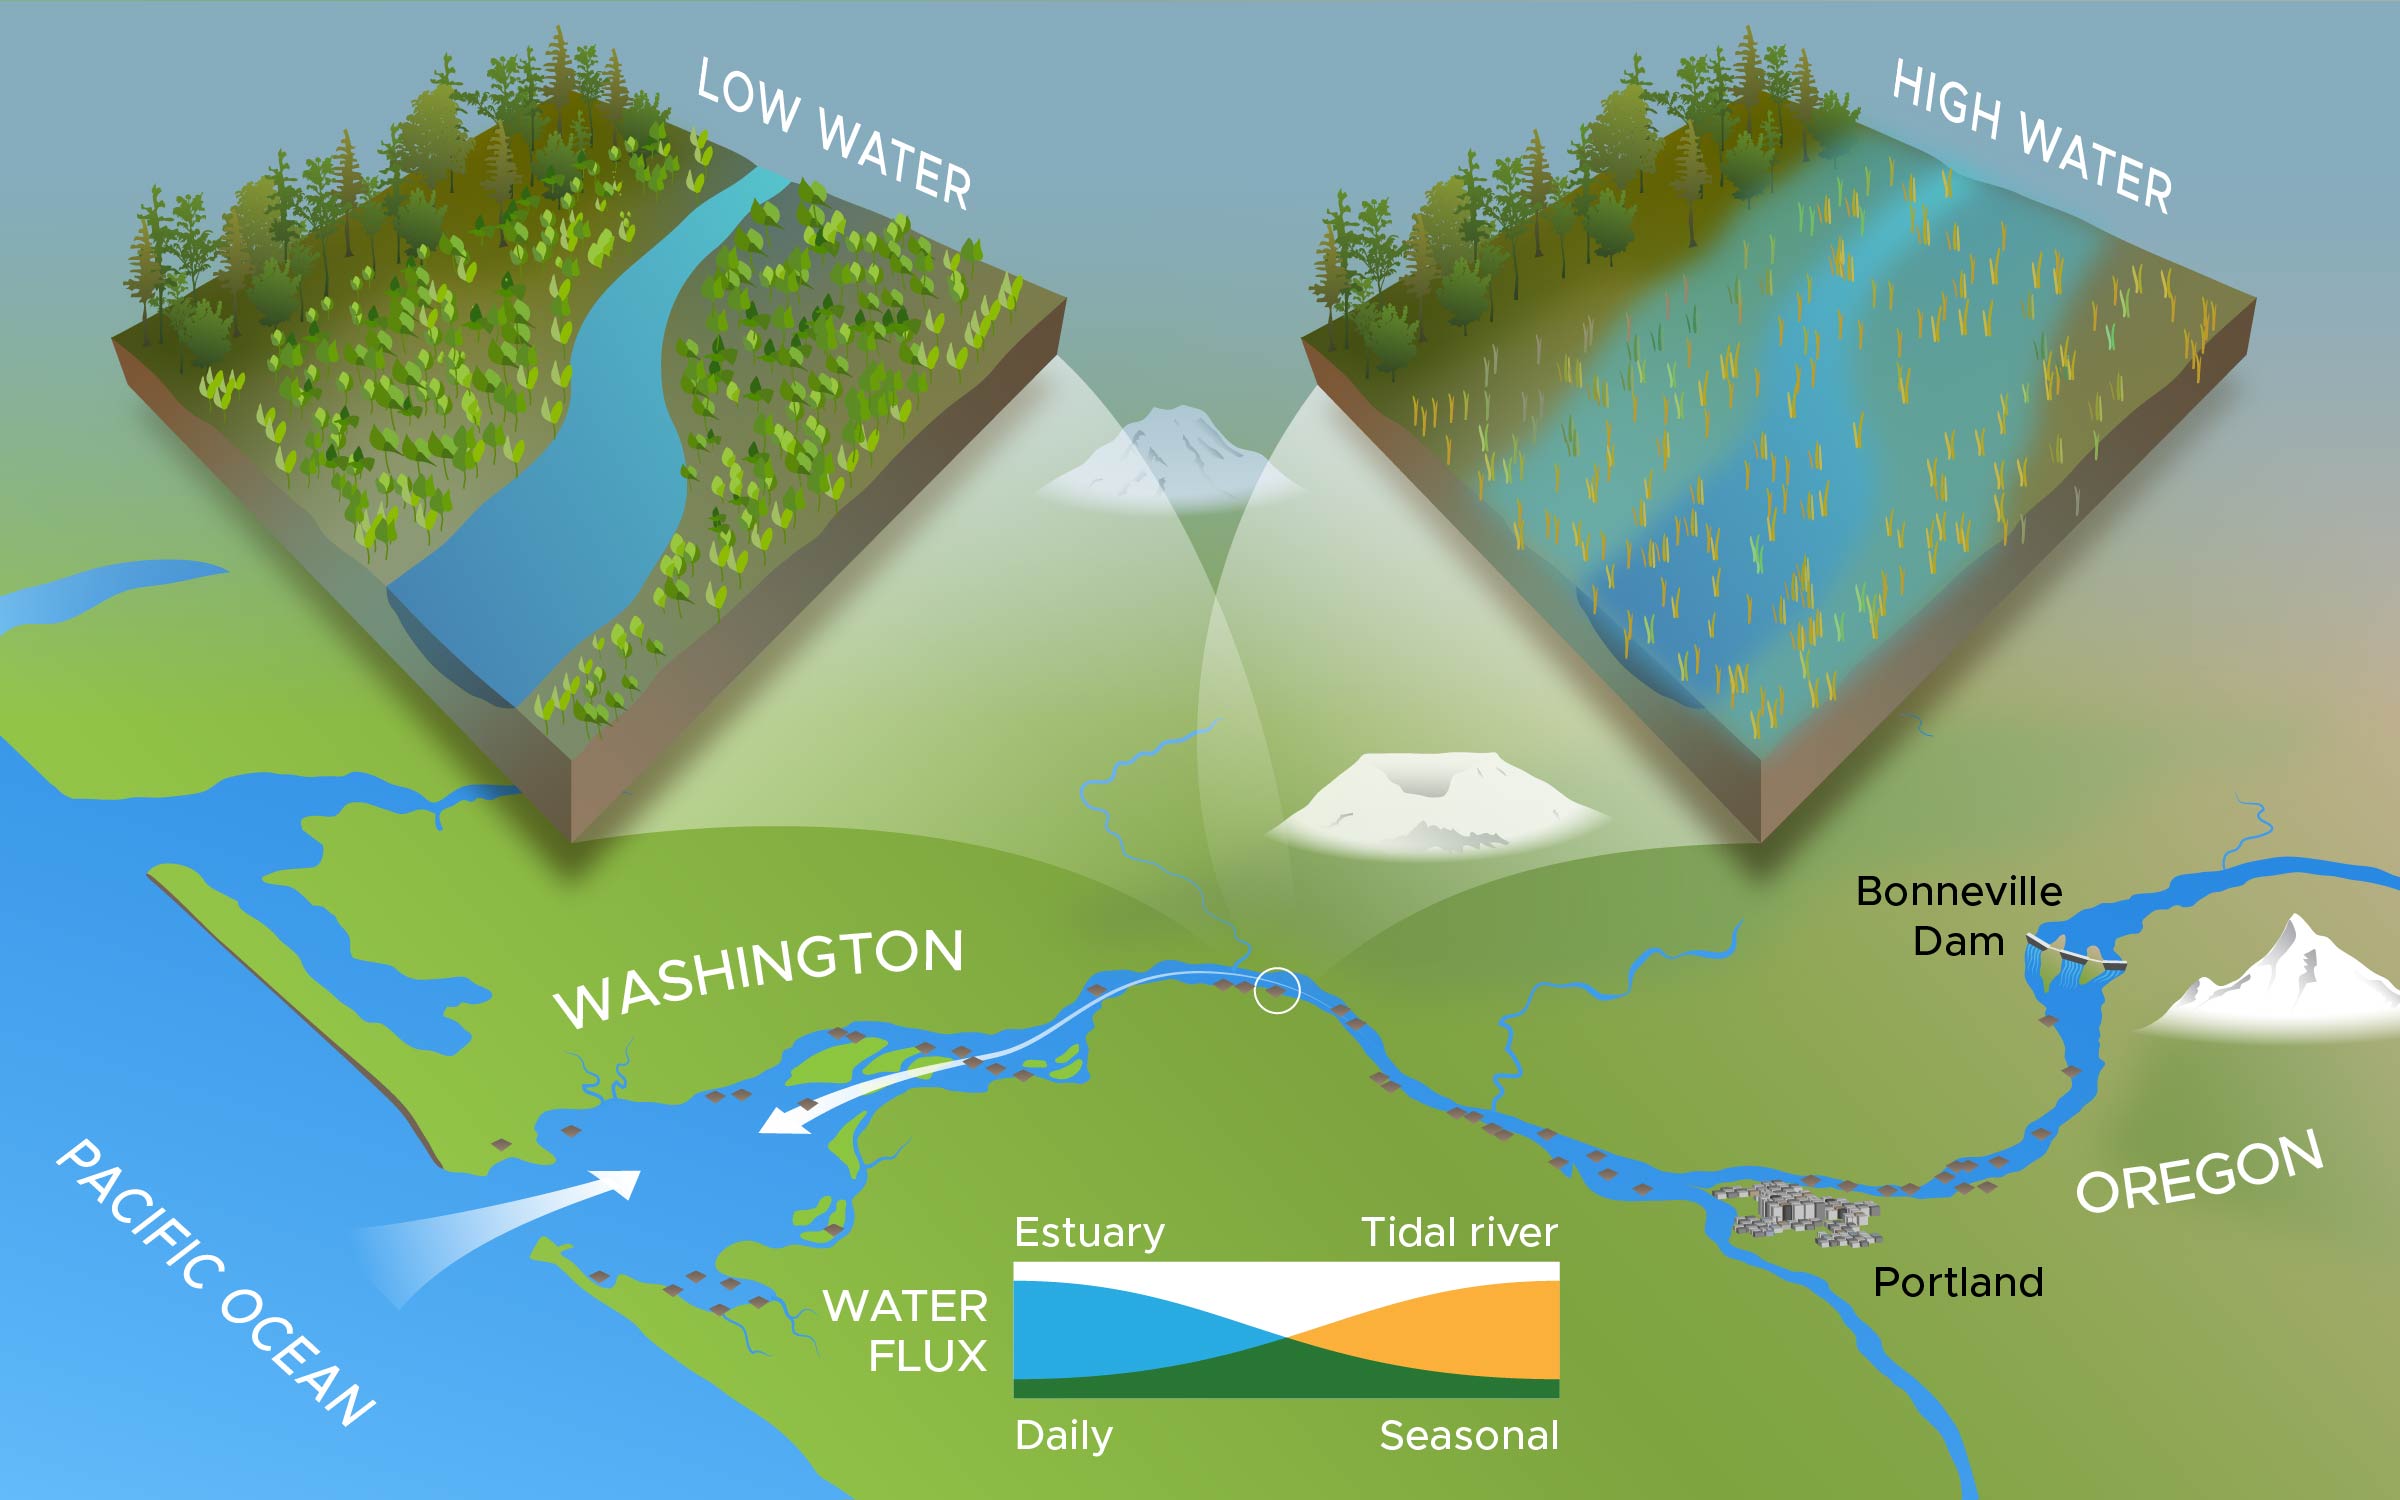 Illustration of Columbia River floodplain study area to examine how hydrology cycles affect estuary and tidal ecosystems.